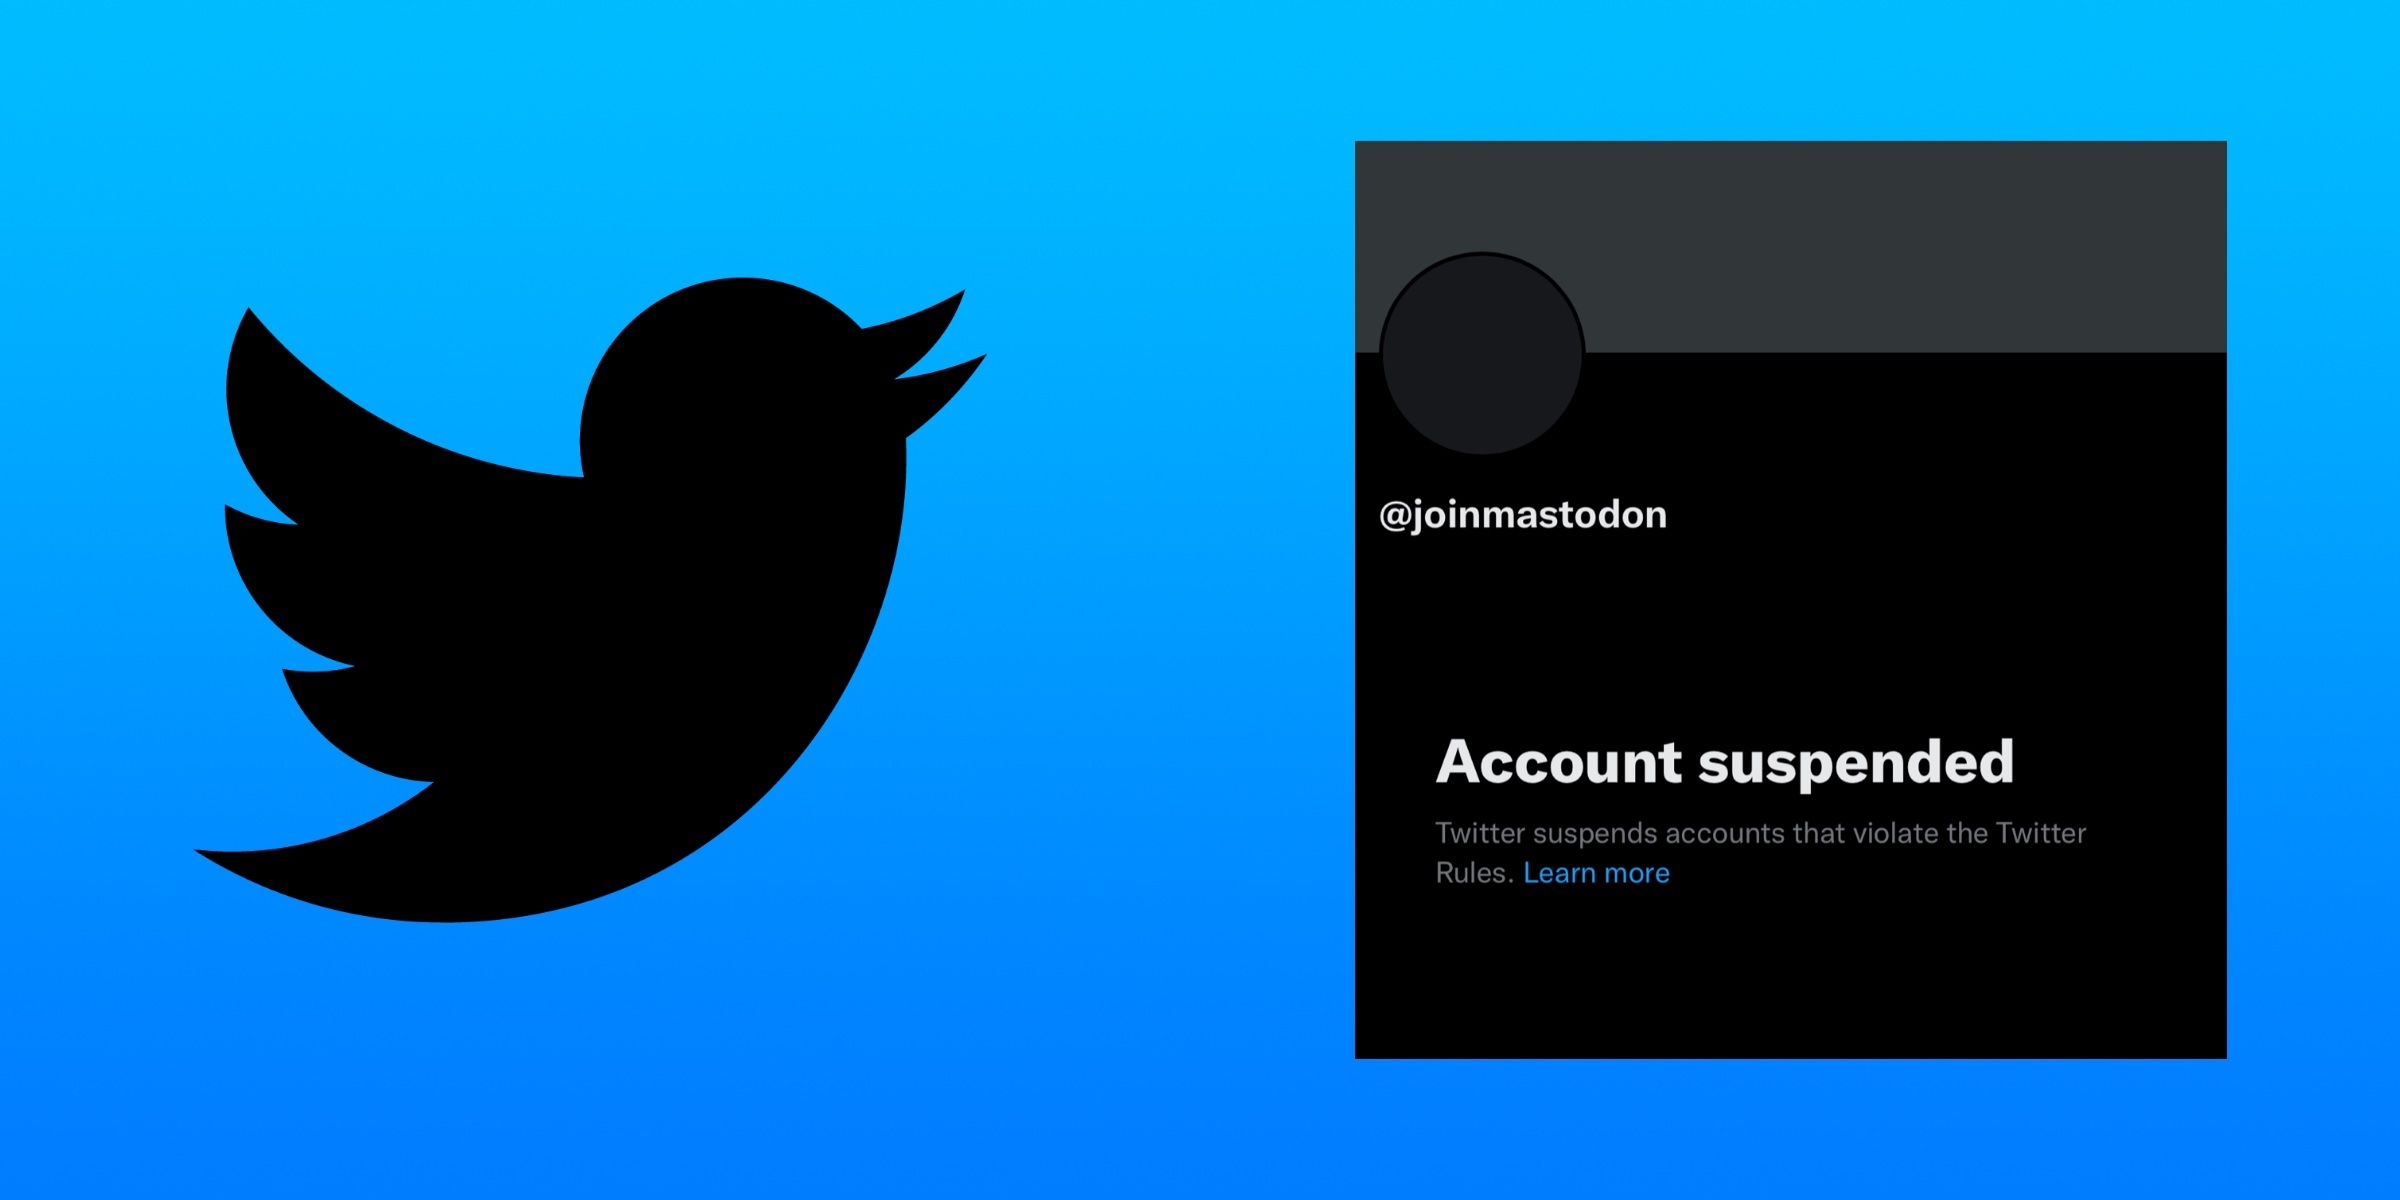 A black Twitter logo next to the account page for @joinmastodon, which was suspended on Dec. 15.